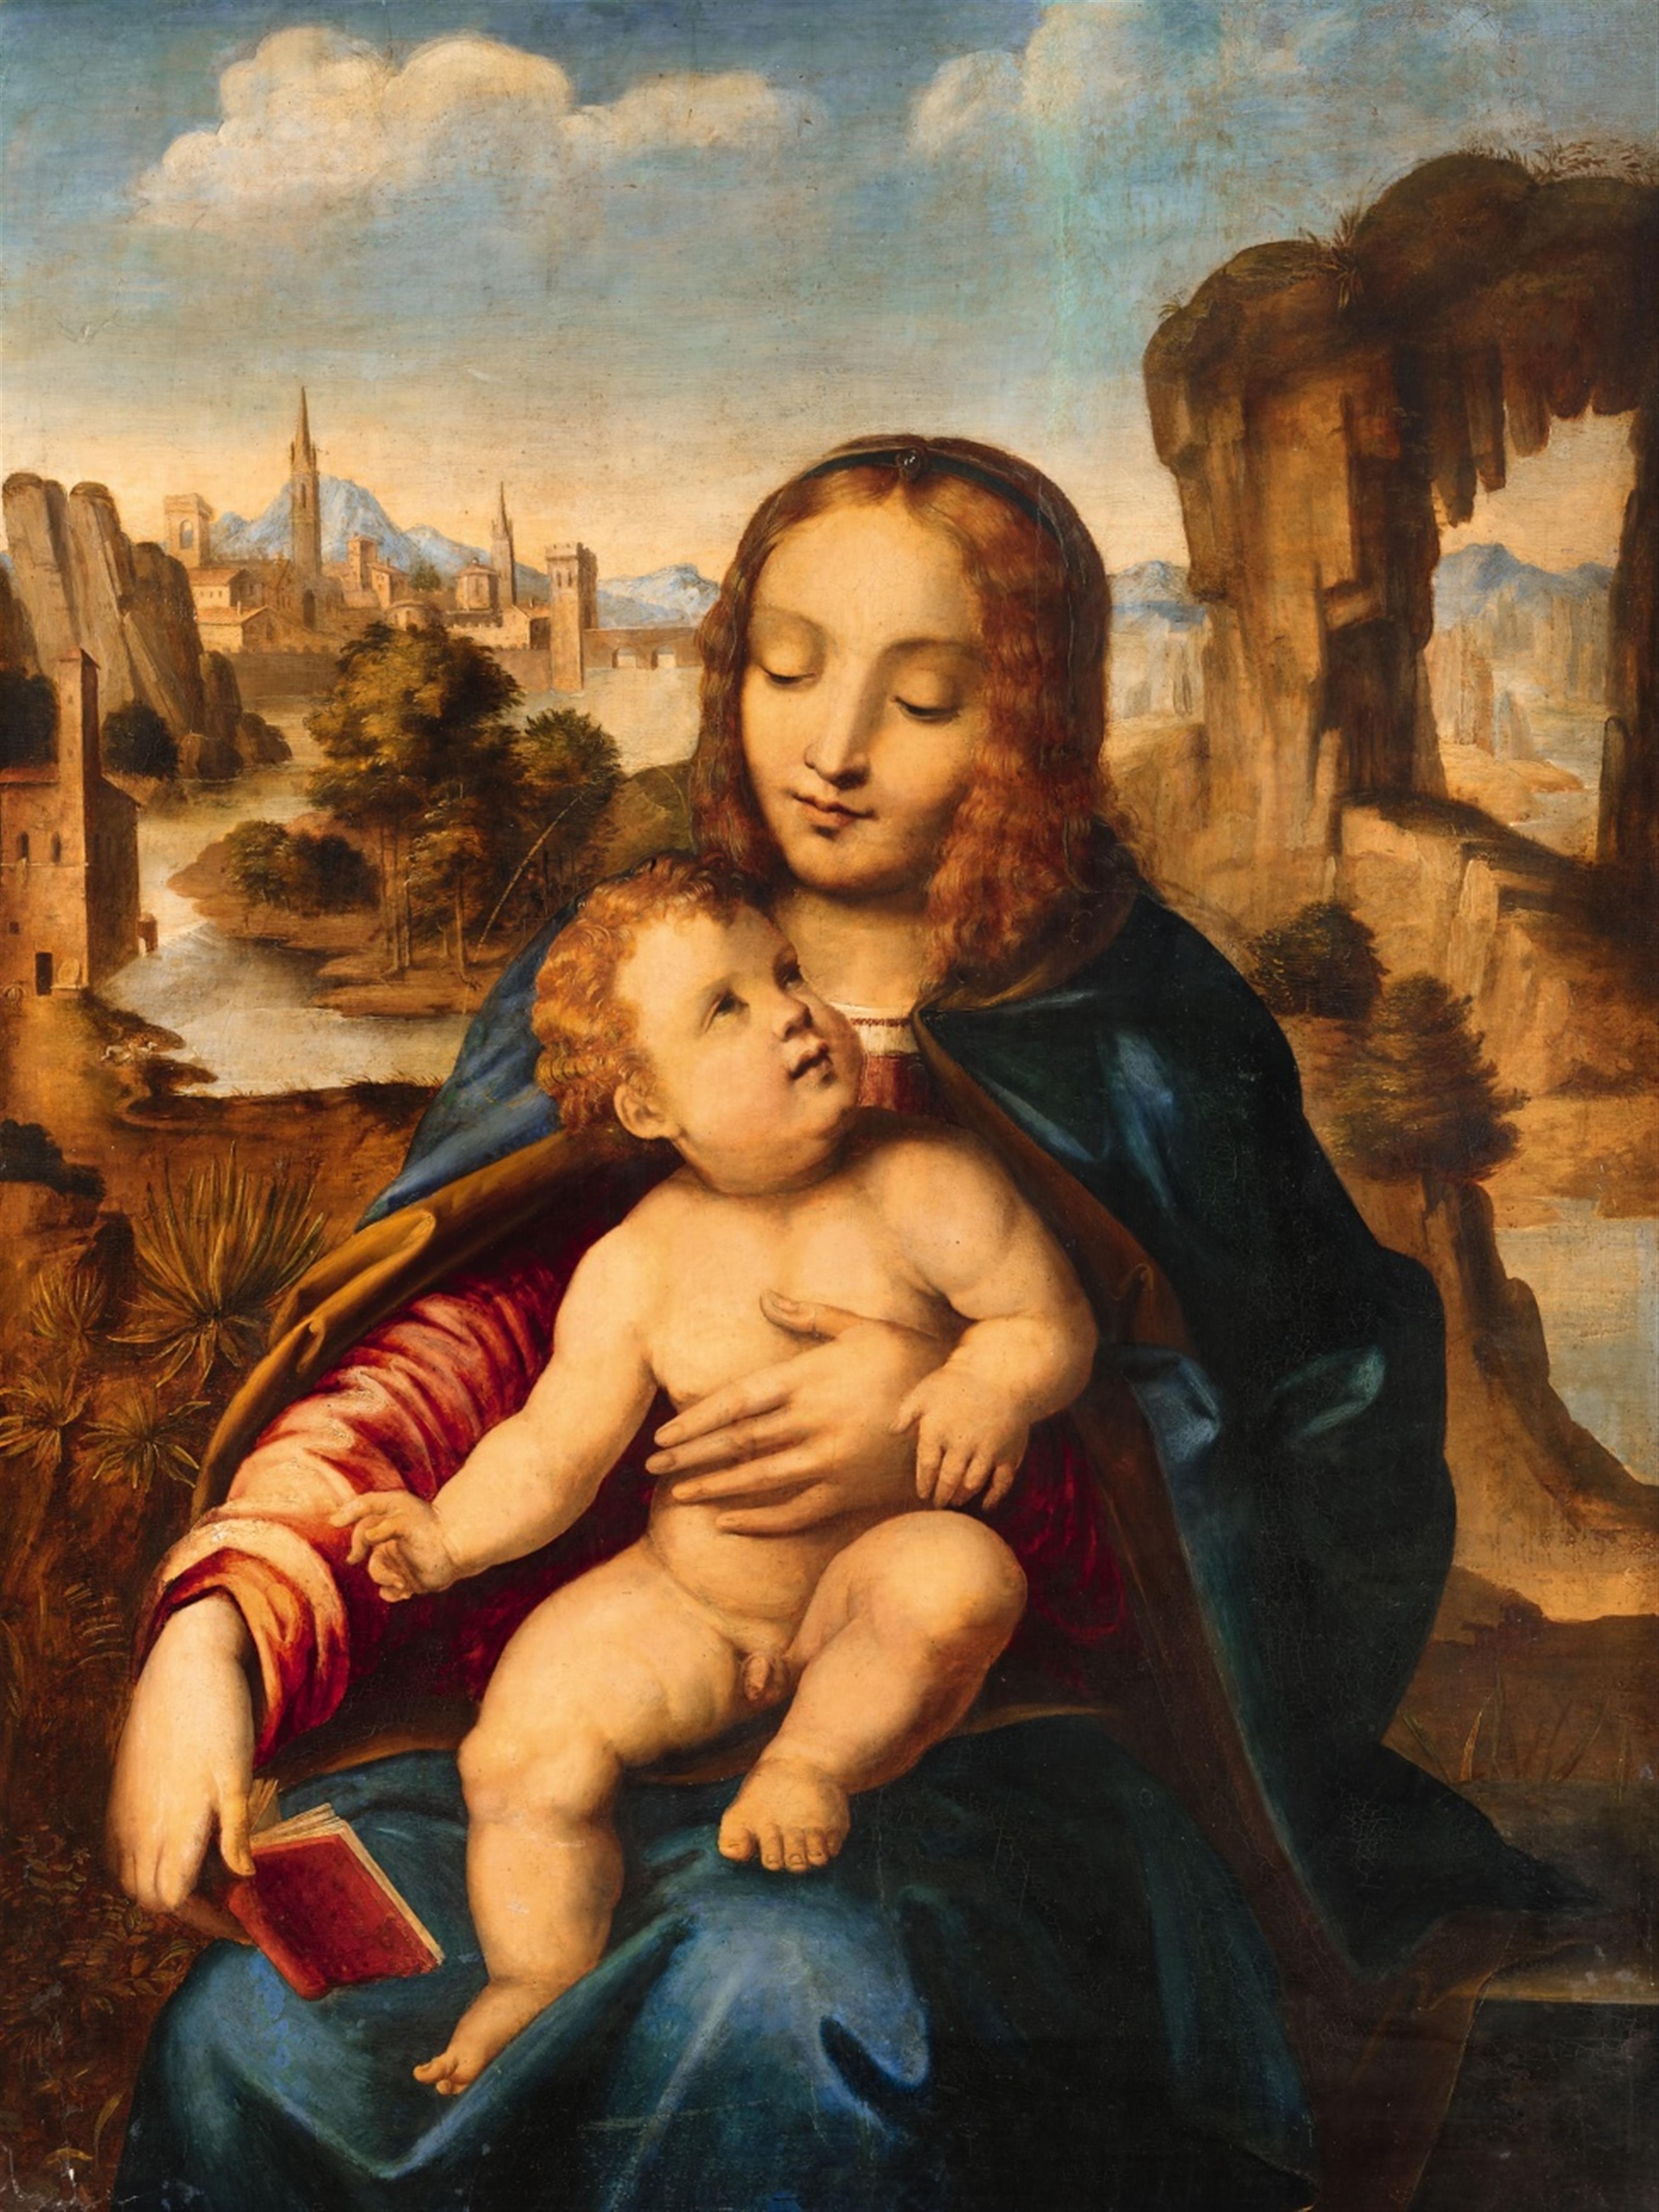 North Italian School early 16th century - Madonna with Child in a Rocky Landscape - image-1